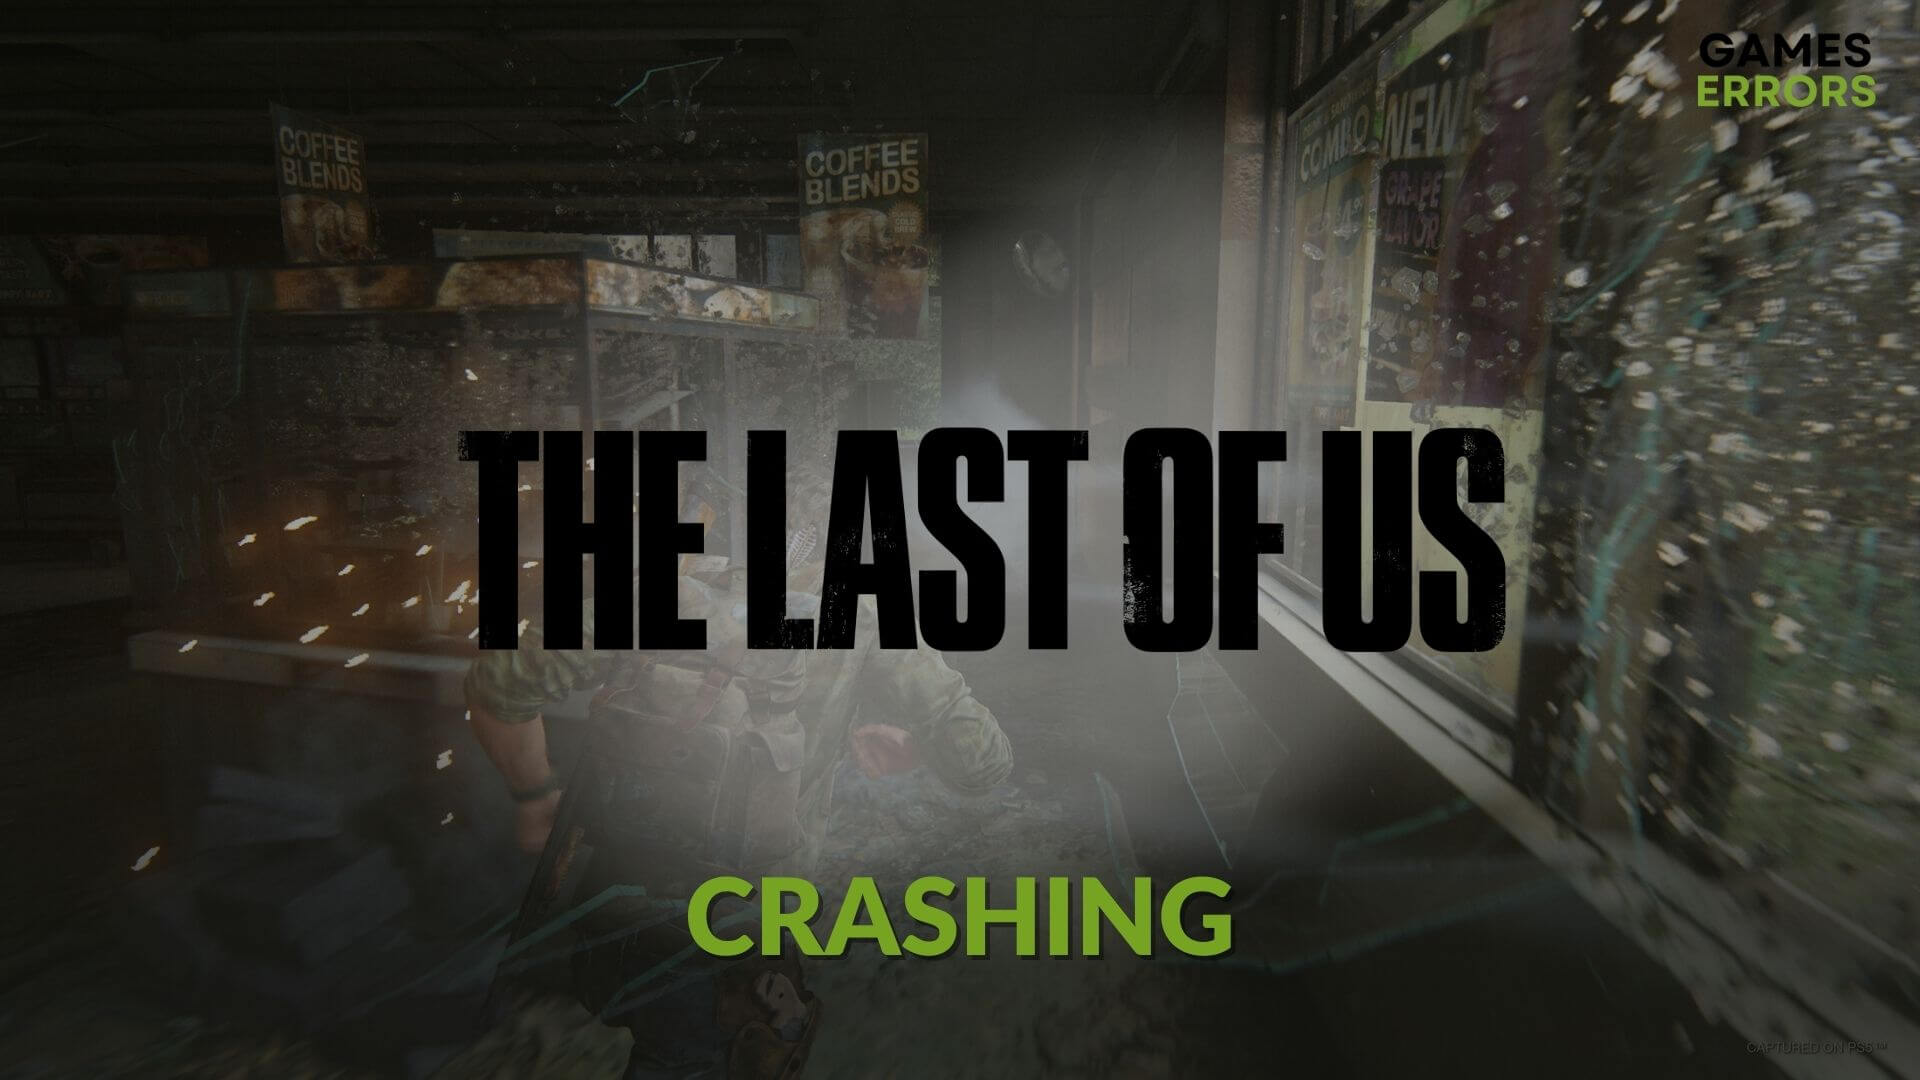 How to Fix the Last of Us Part 1 Freezing Issue on PC